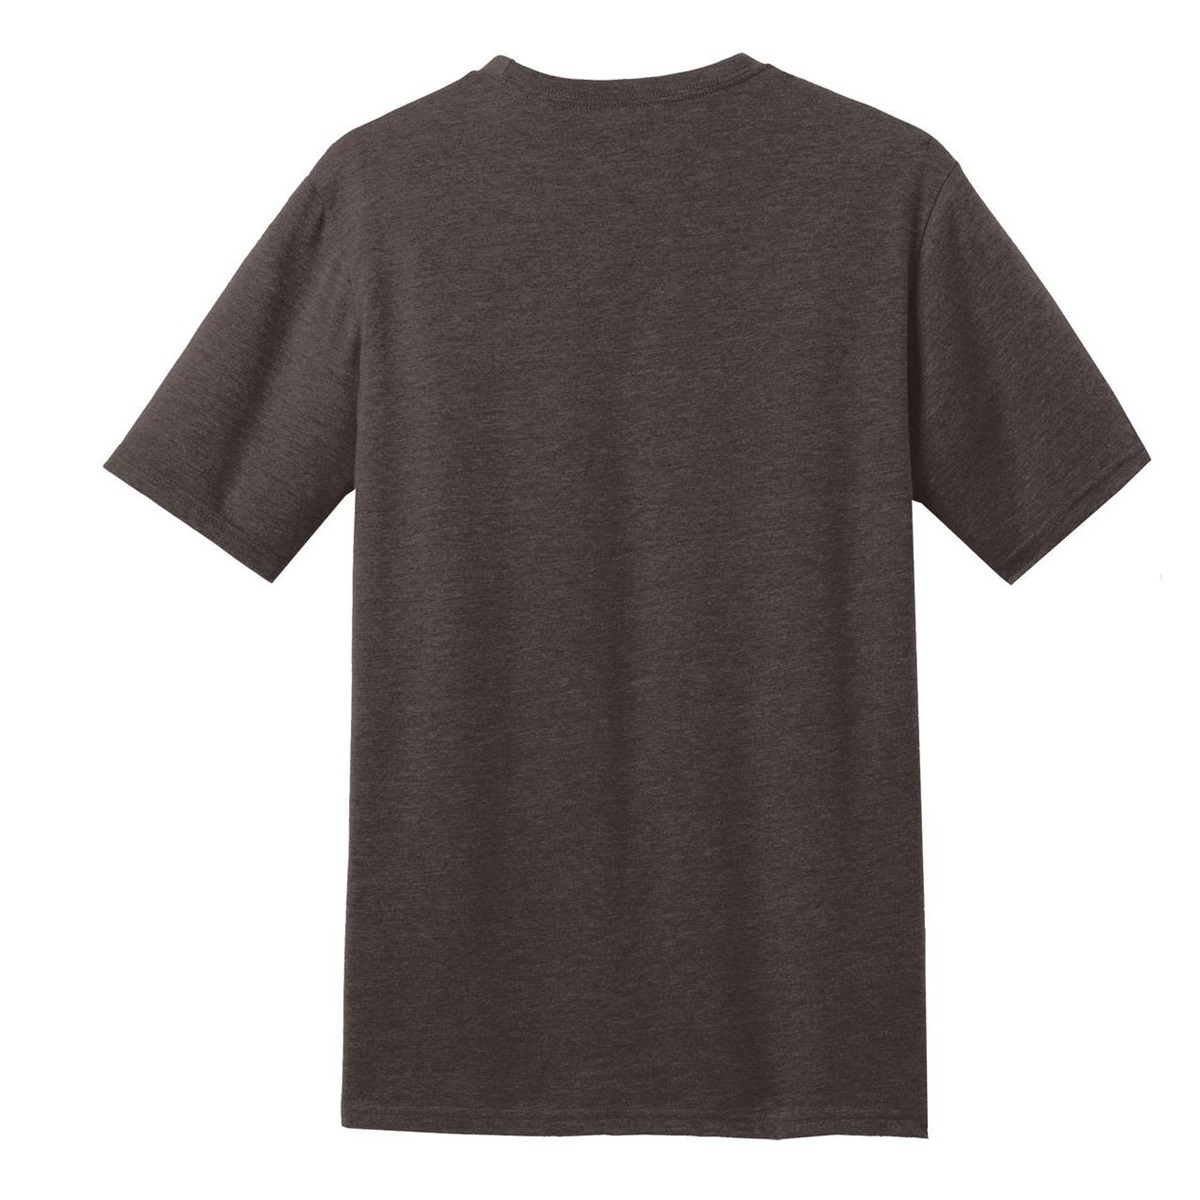 District Made DM108 Mens Perfect Blend Crew Tee - Heathered Brown ...